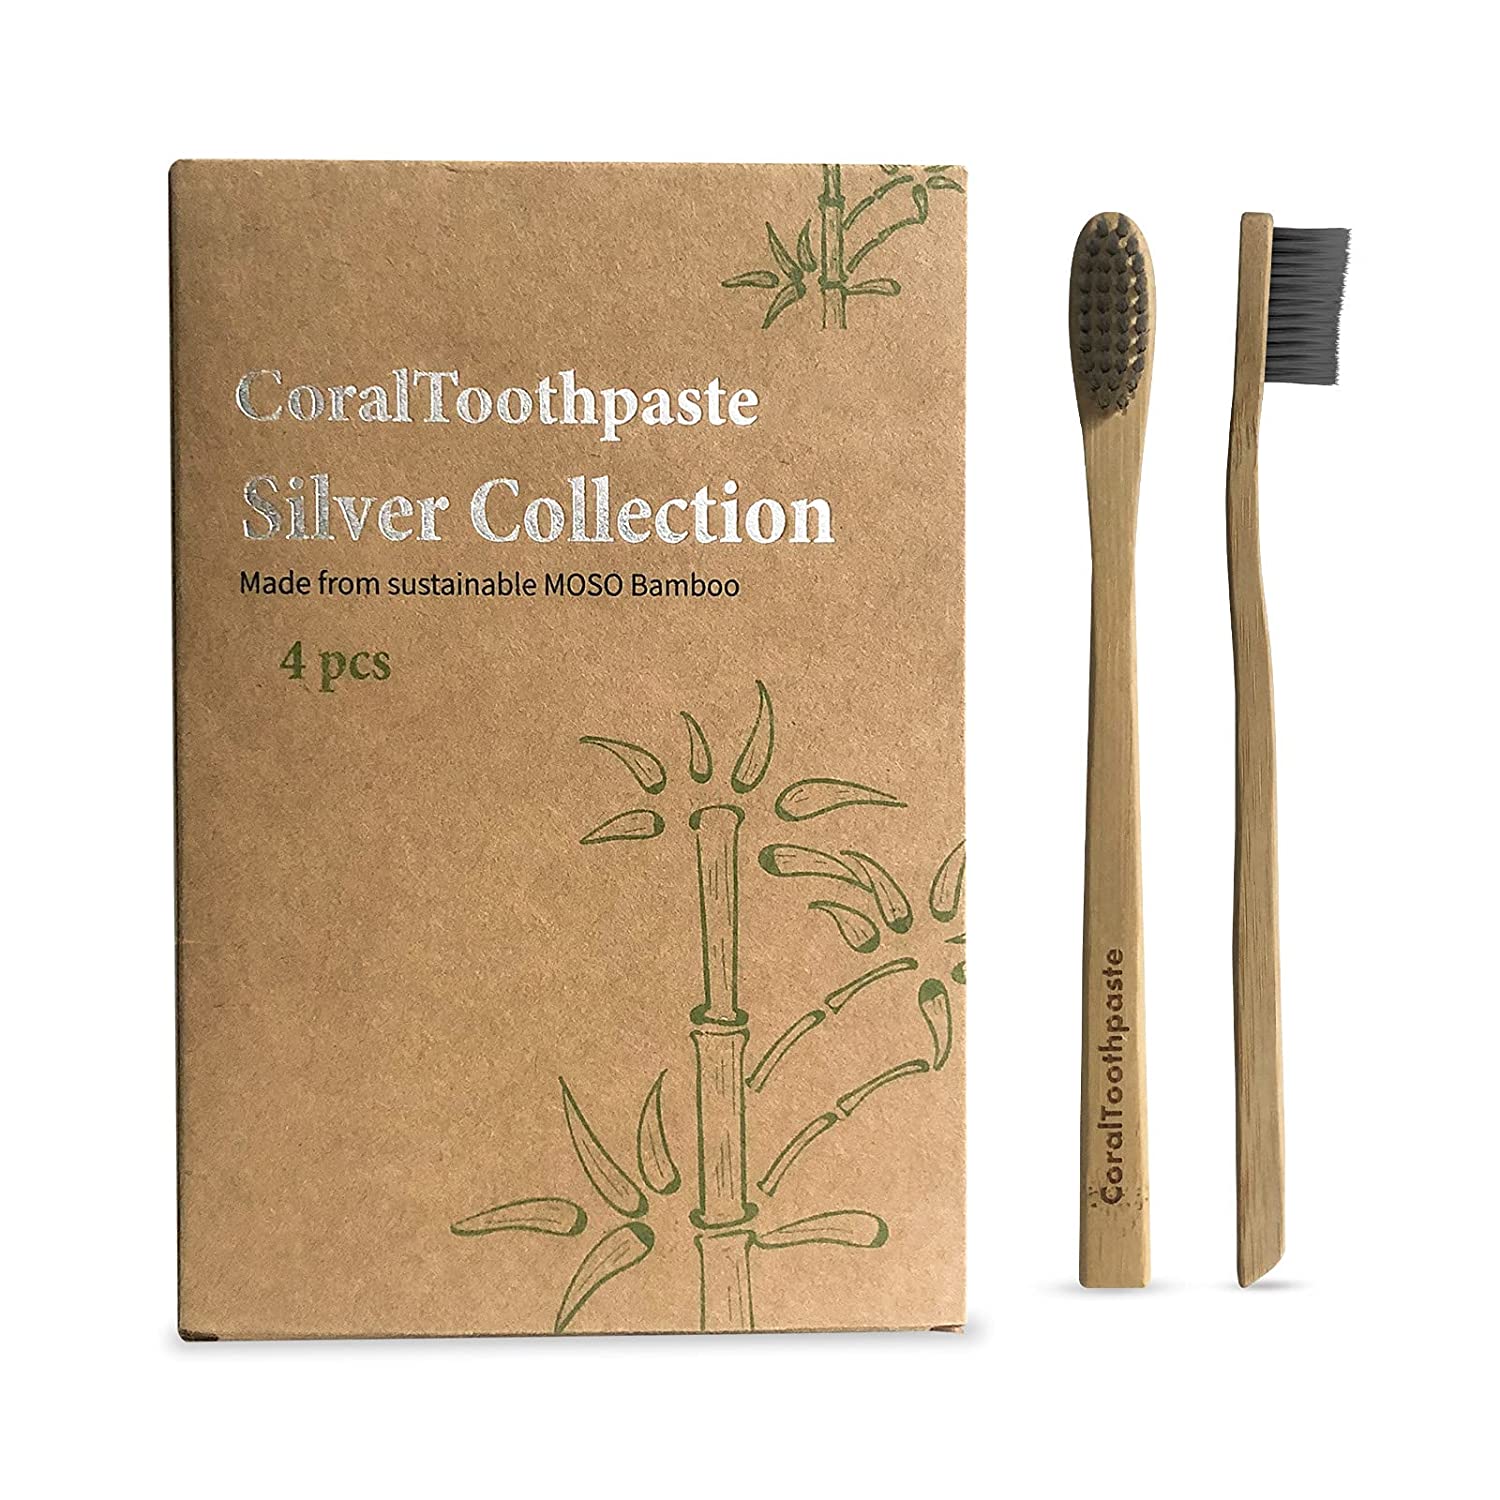 Eco-friendly Coral Toothpaste & Bamboo Toothbrush Combo - 4 Pack